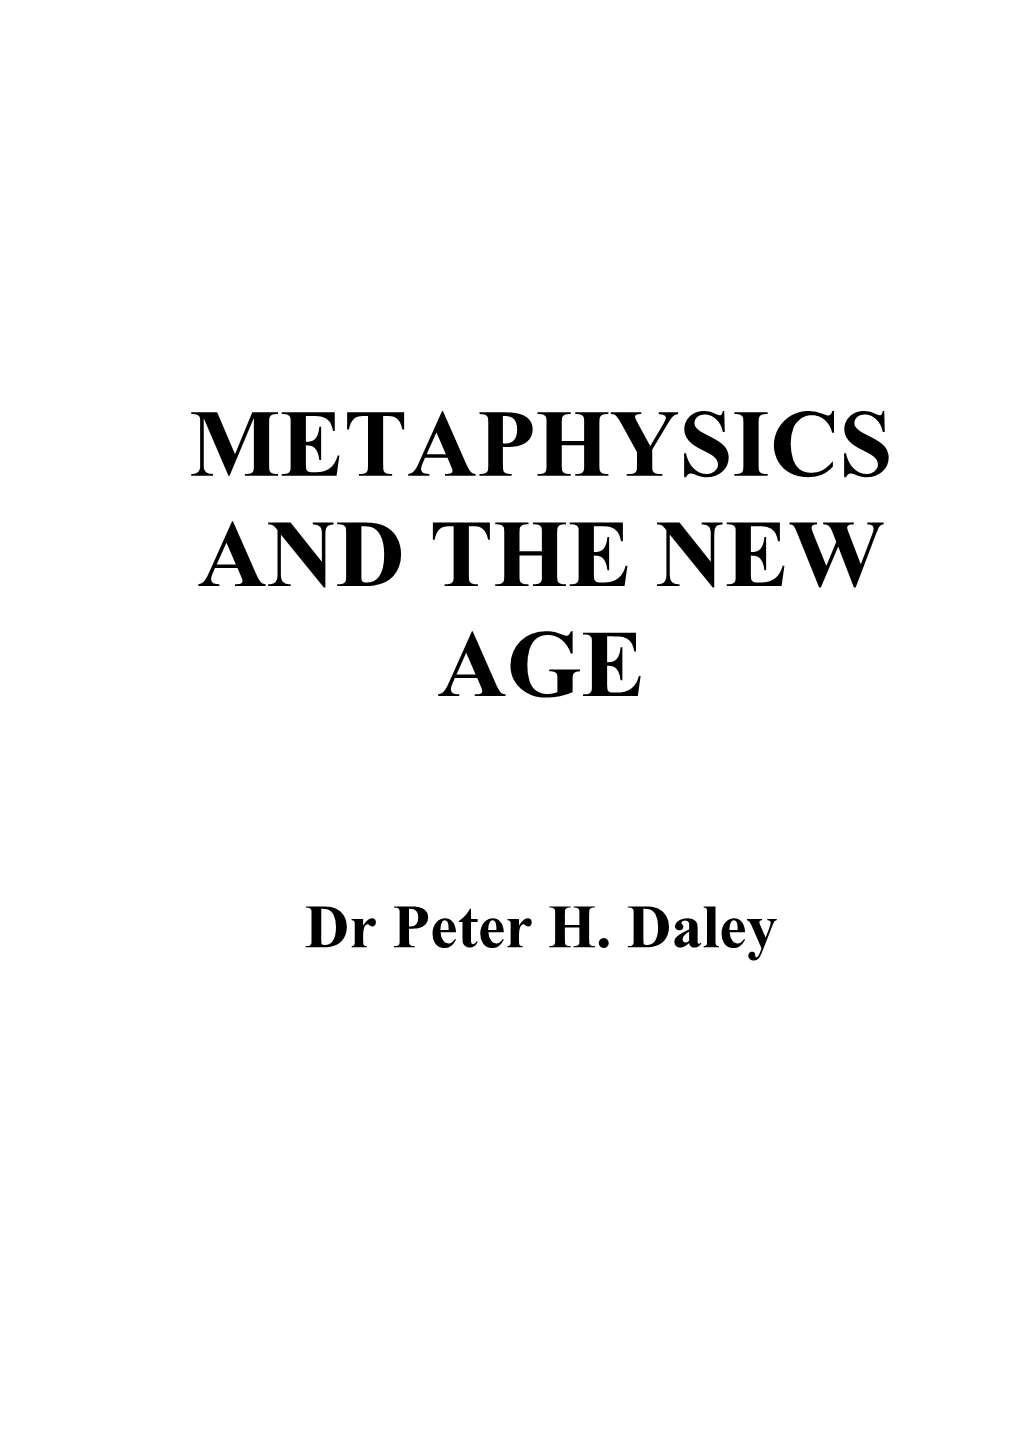 Metaphysics and the New